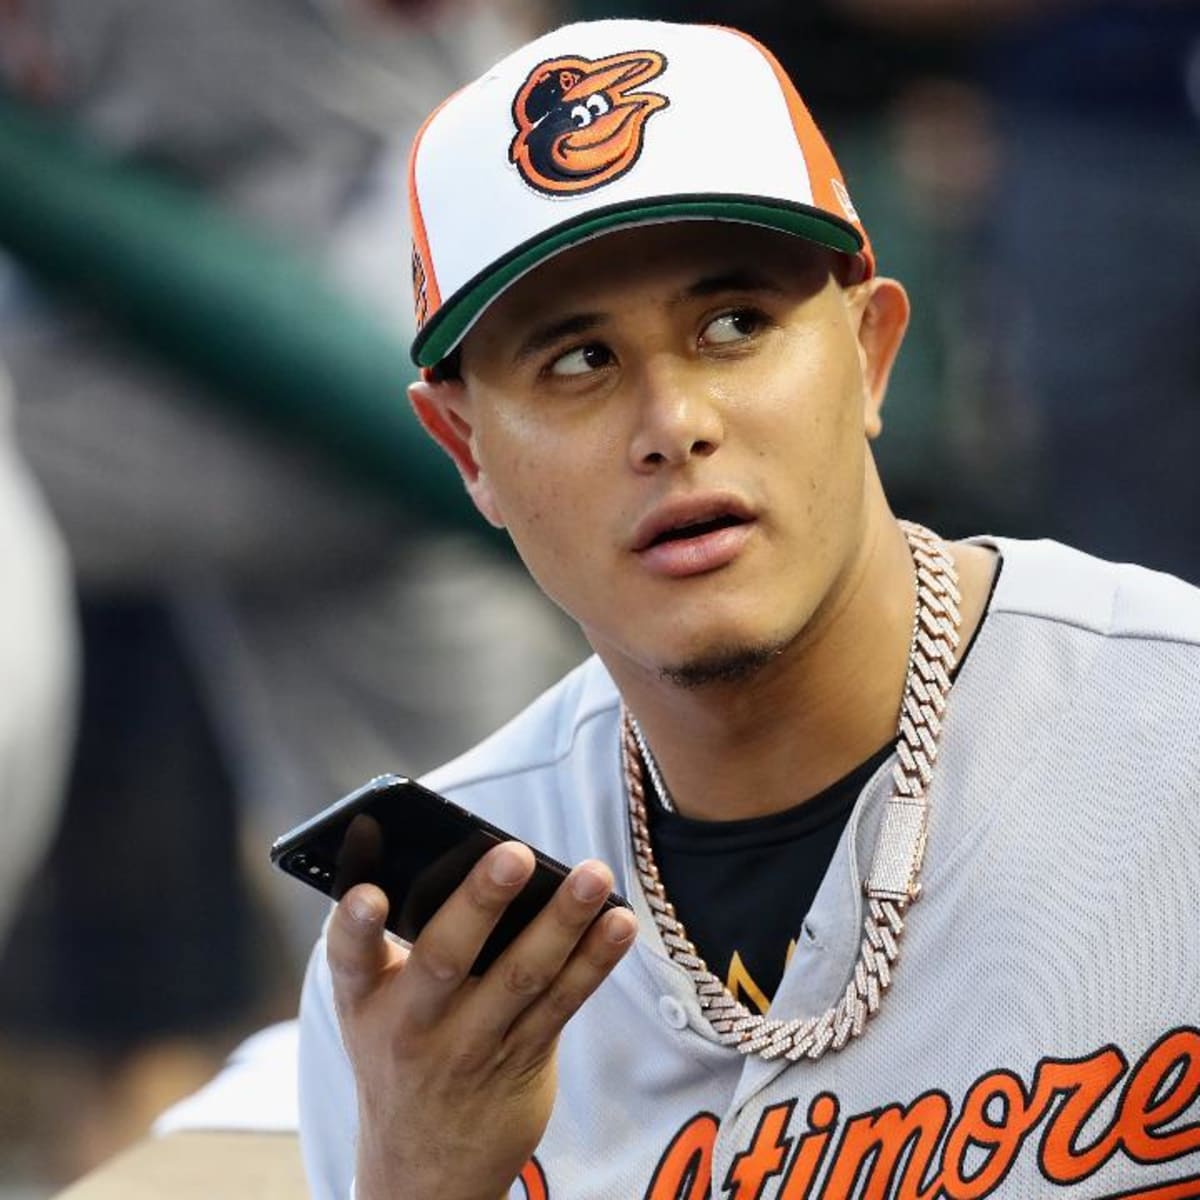 AP Source: Orioles trade All-Star Manny Machado to Dodgers